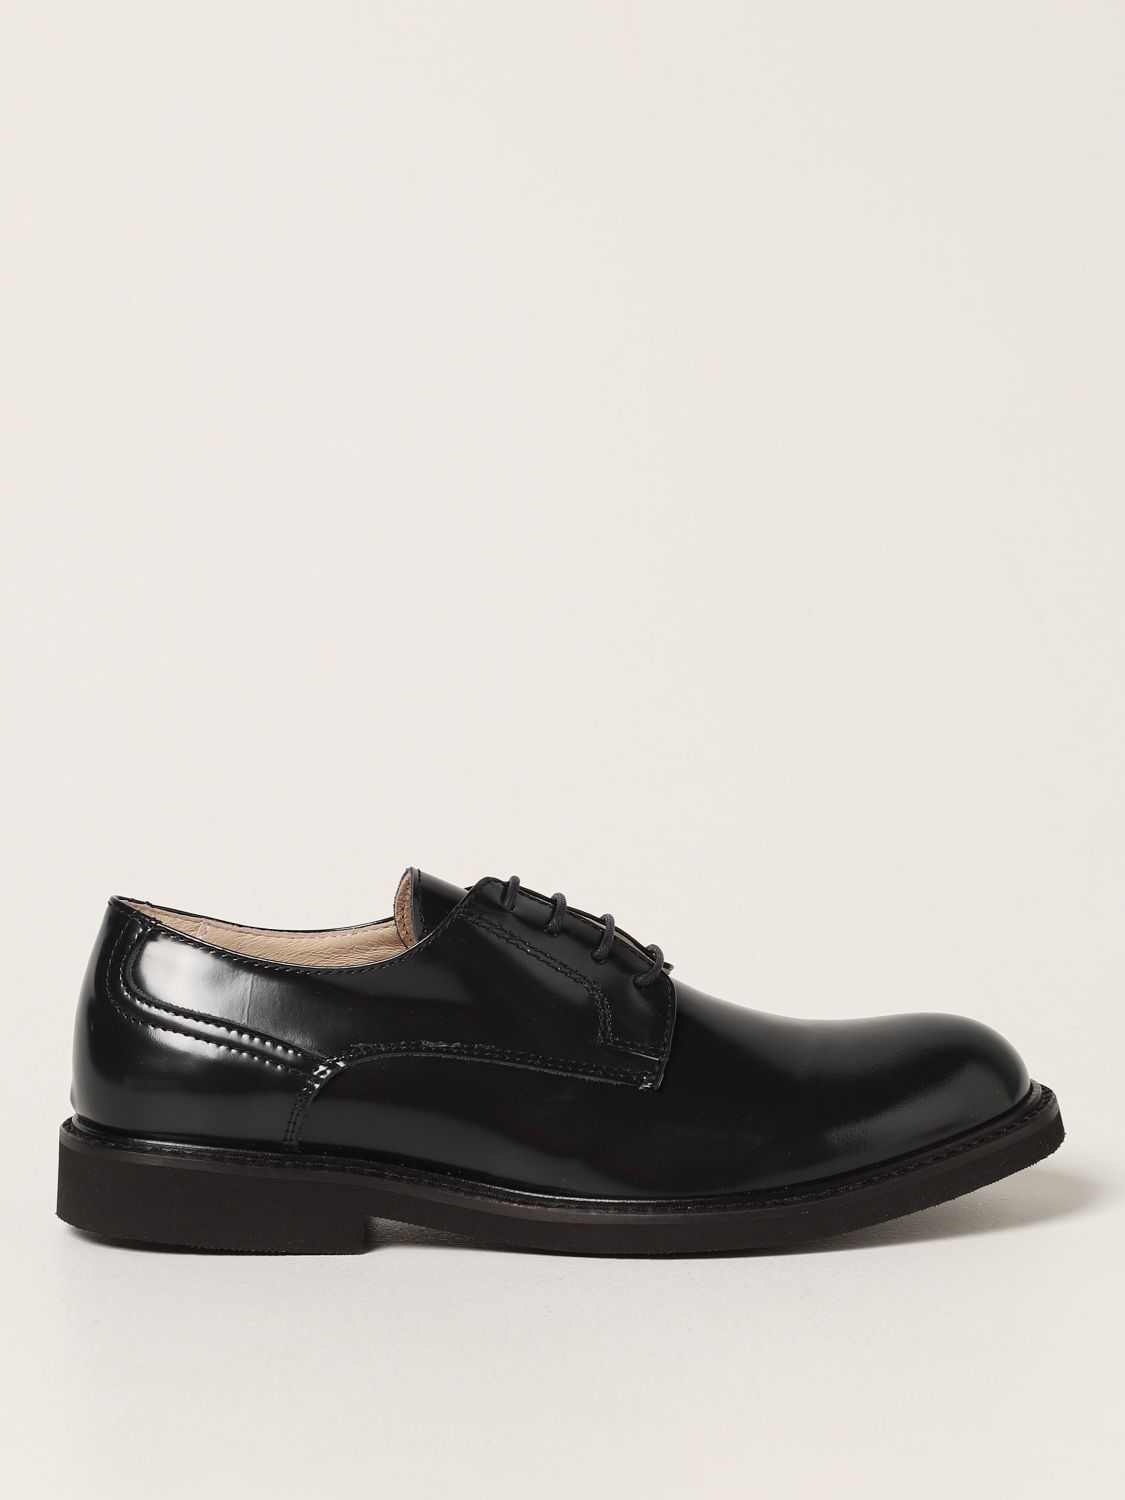 Montelpare Tradition Montelpare Tradition derby in brushed leather